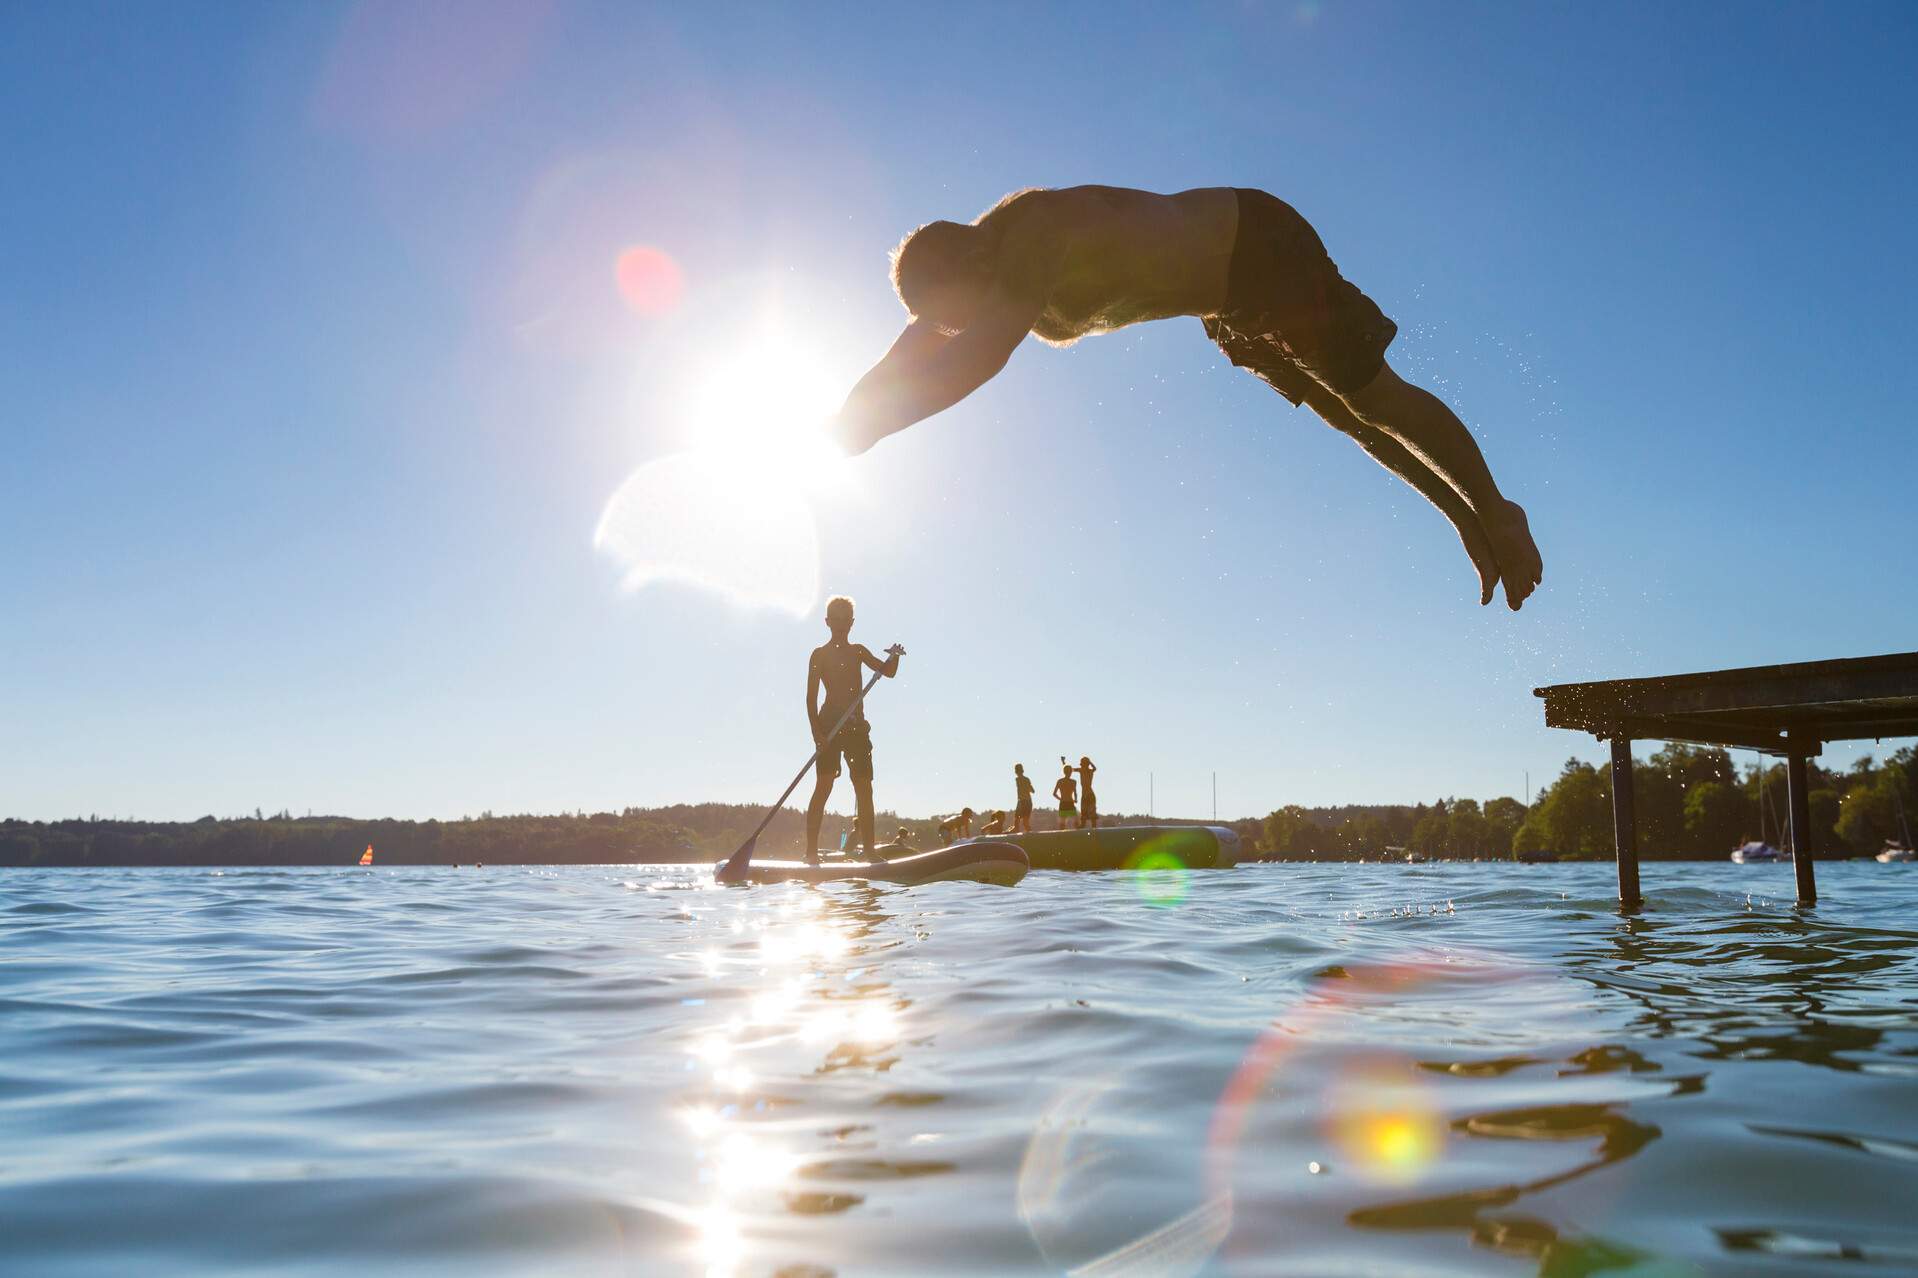 A man diving into a lake with kids enjoying water activities in the distance.